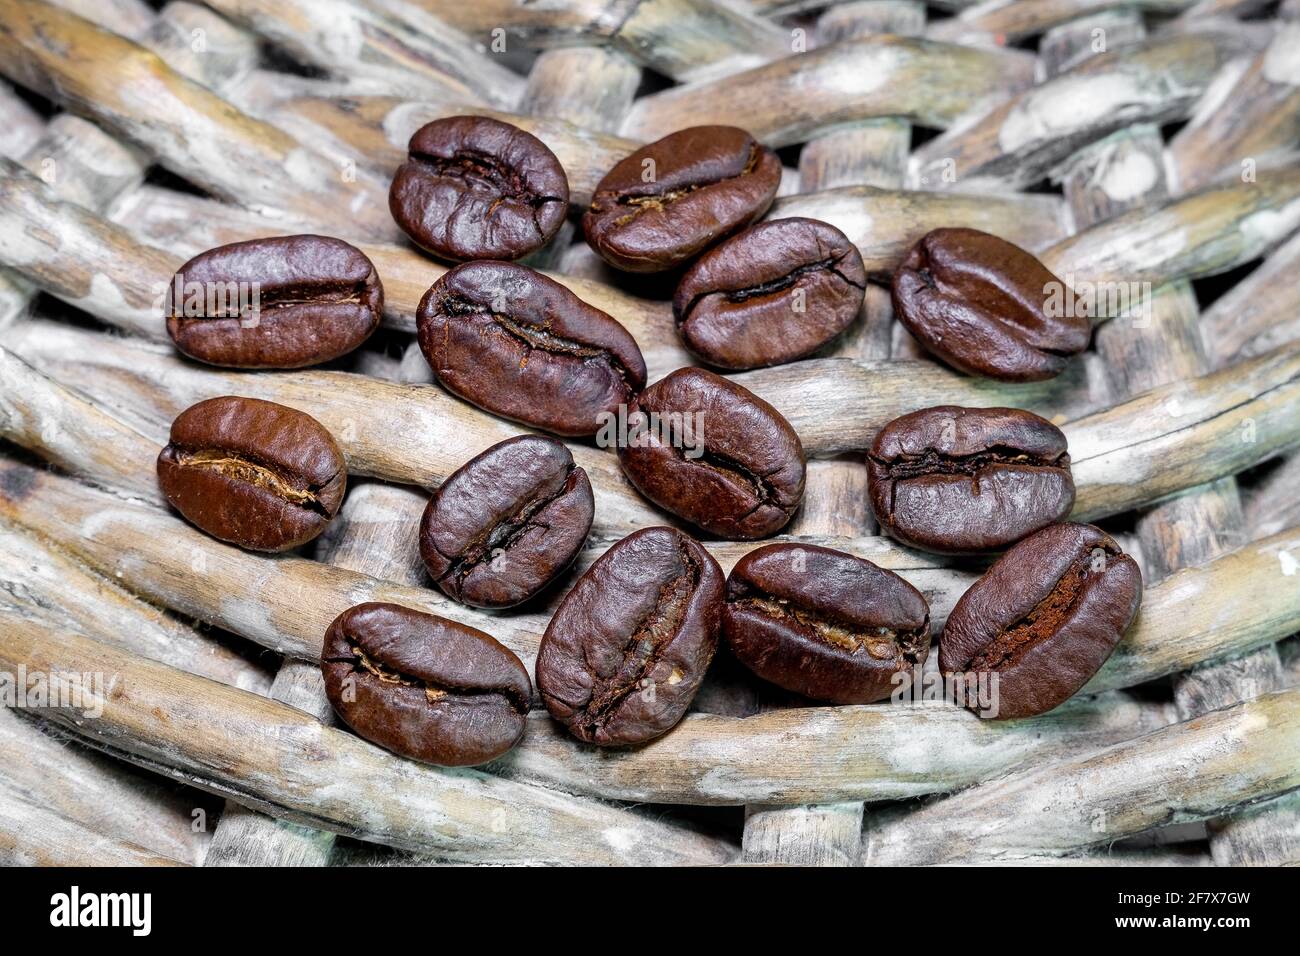 black coffee grains on a braided background photographed close-up Stock Photo